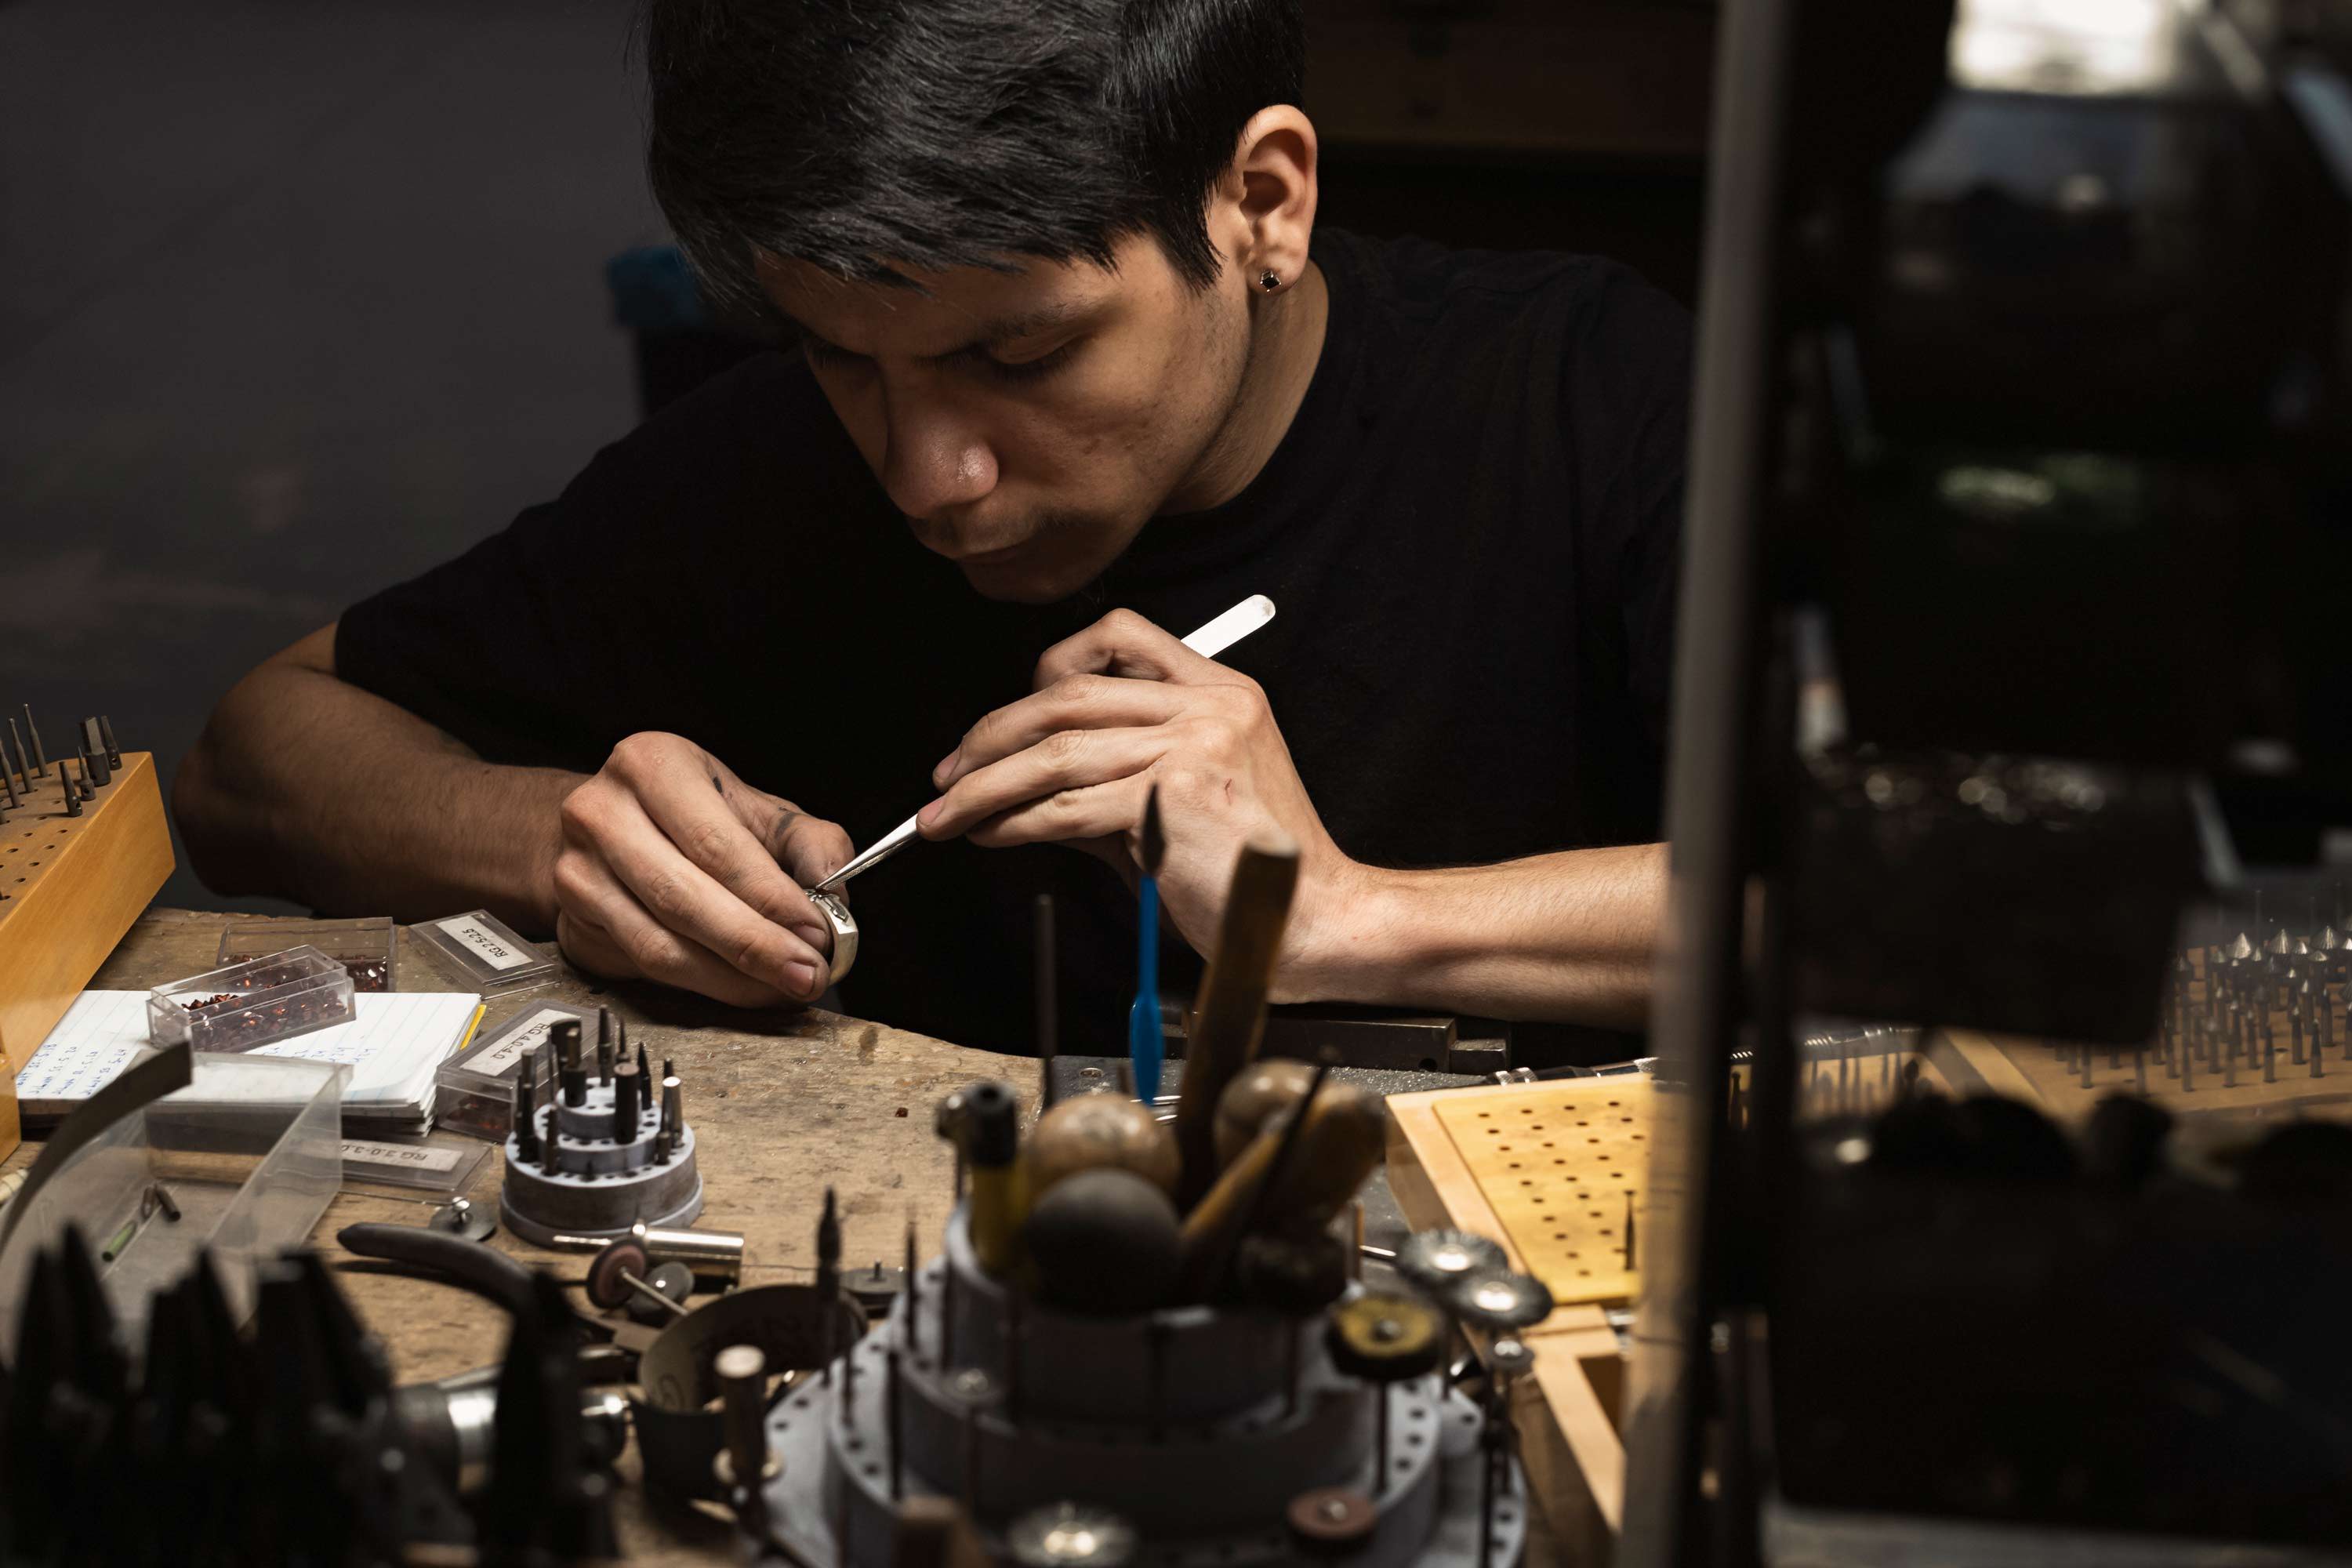 A NightRider Master Jewelry handcrafting a ring